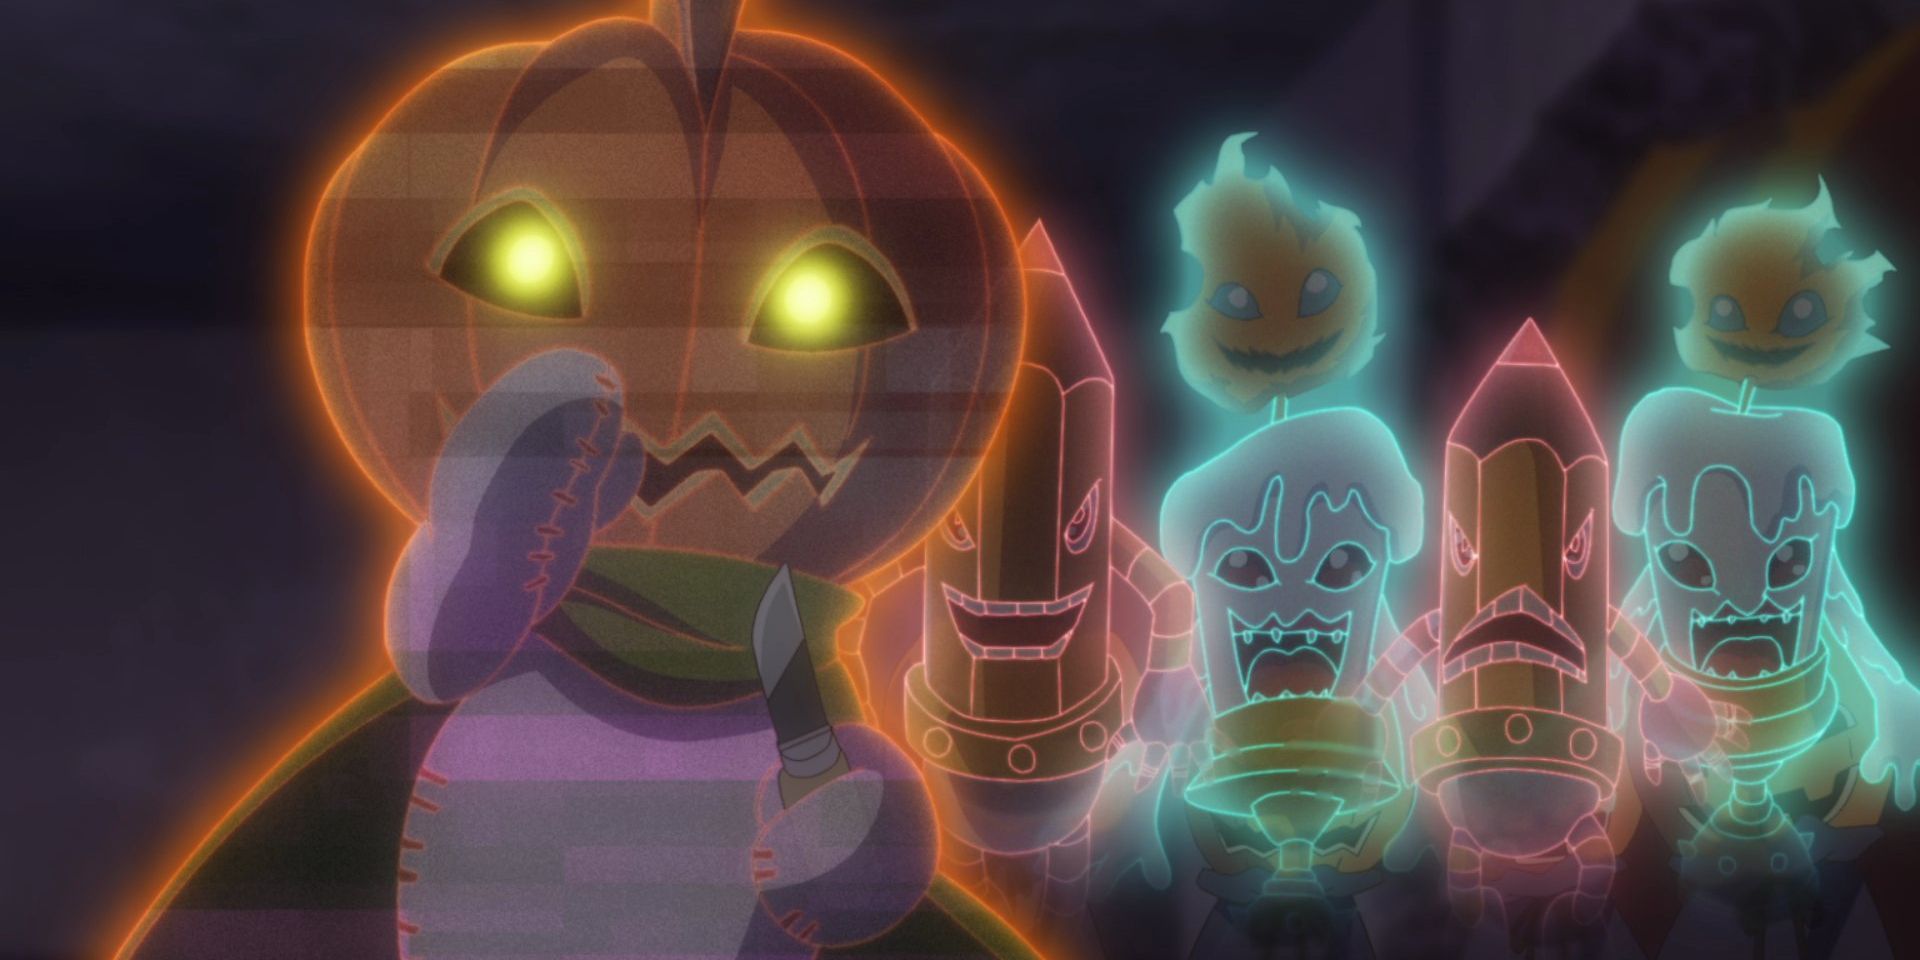 Digimon Ghost Game Preview Teases Spooky Mummy Fight